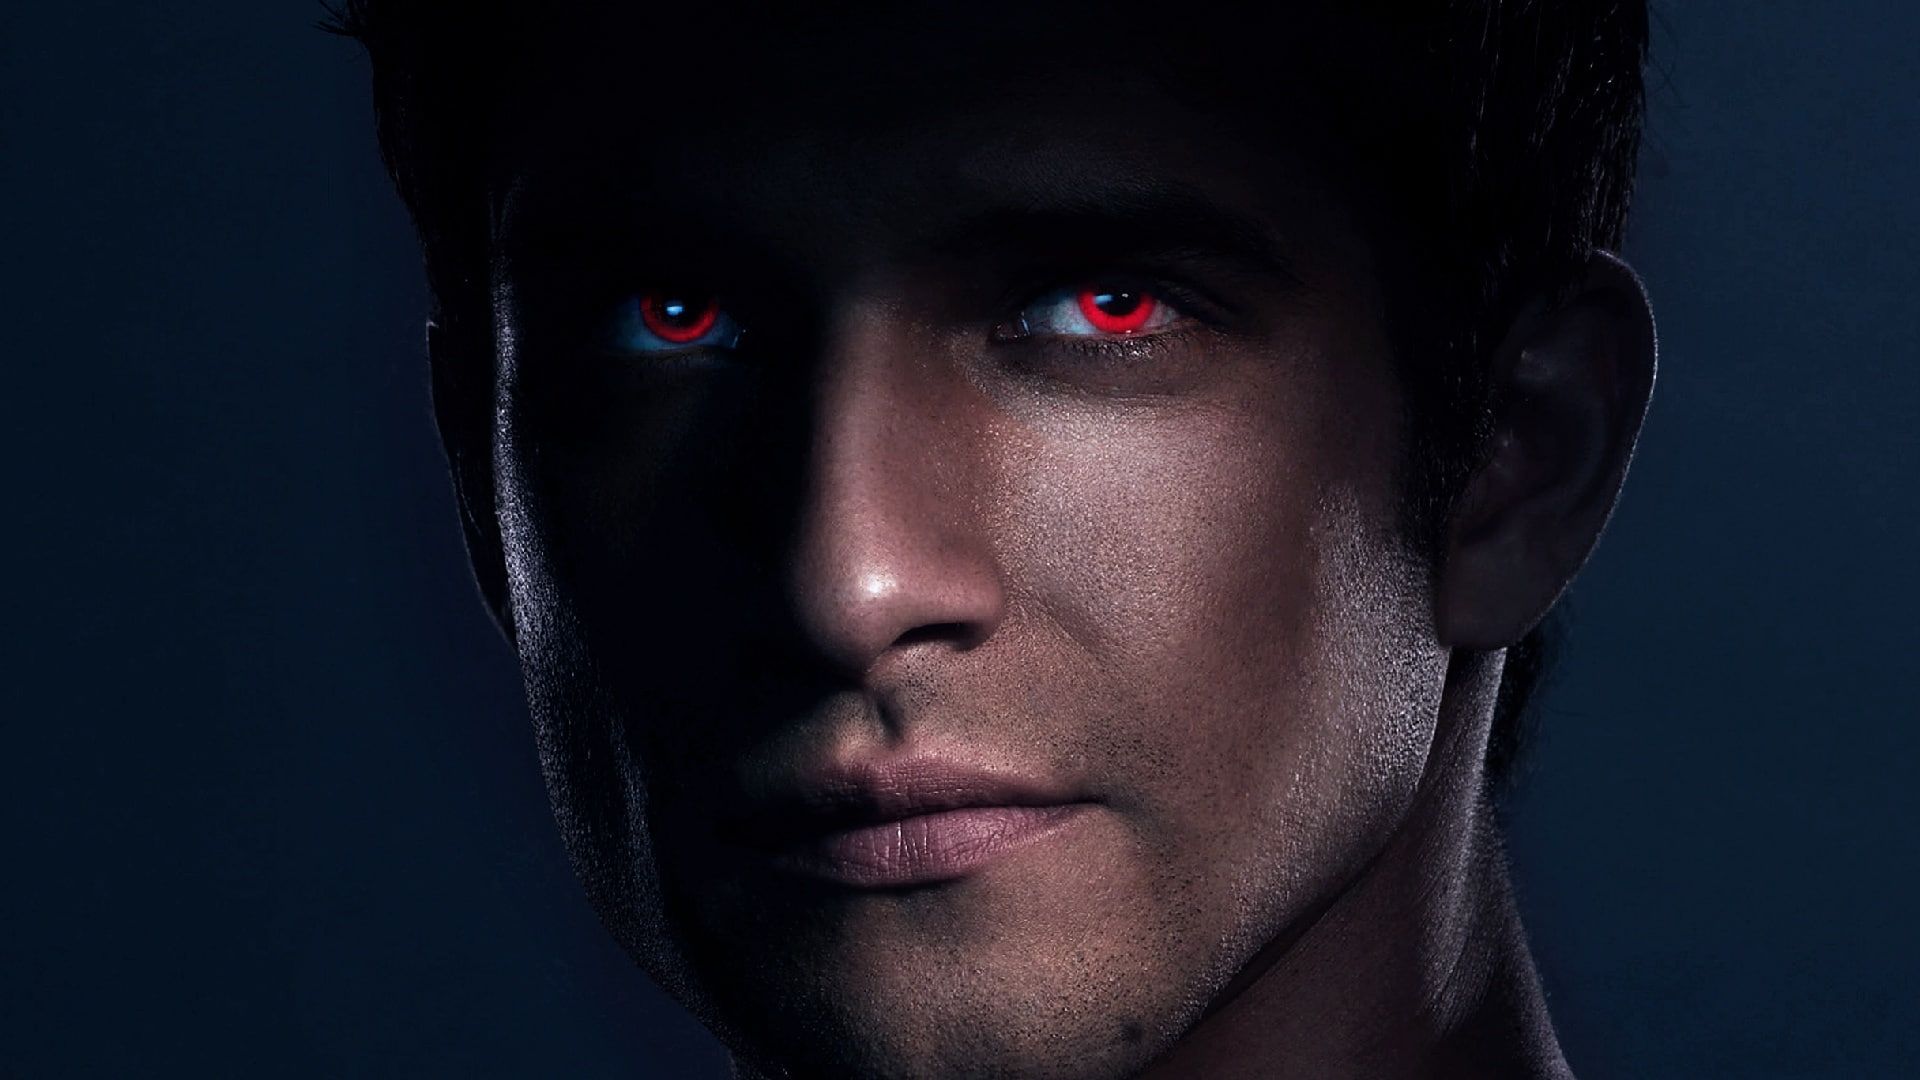 Pictures Of Scott Mccall Wallpapers